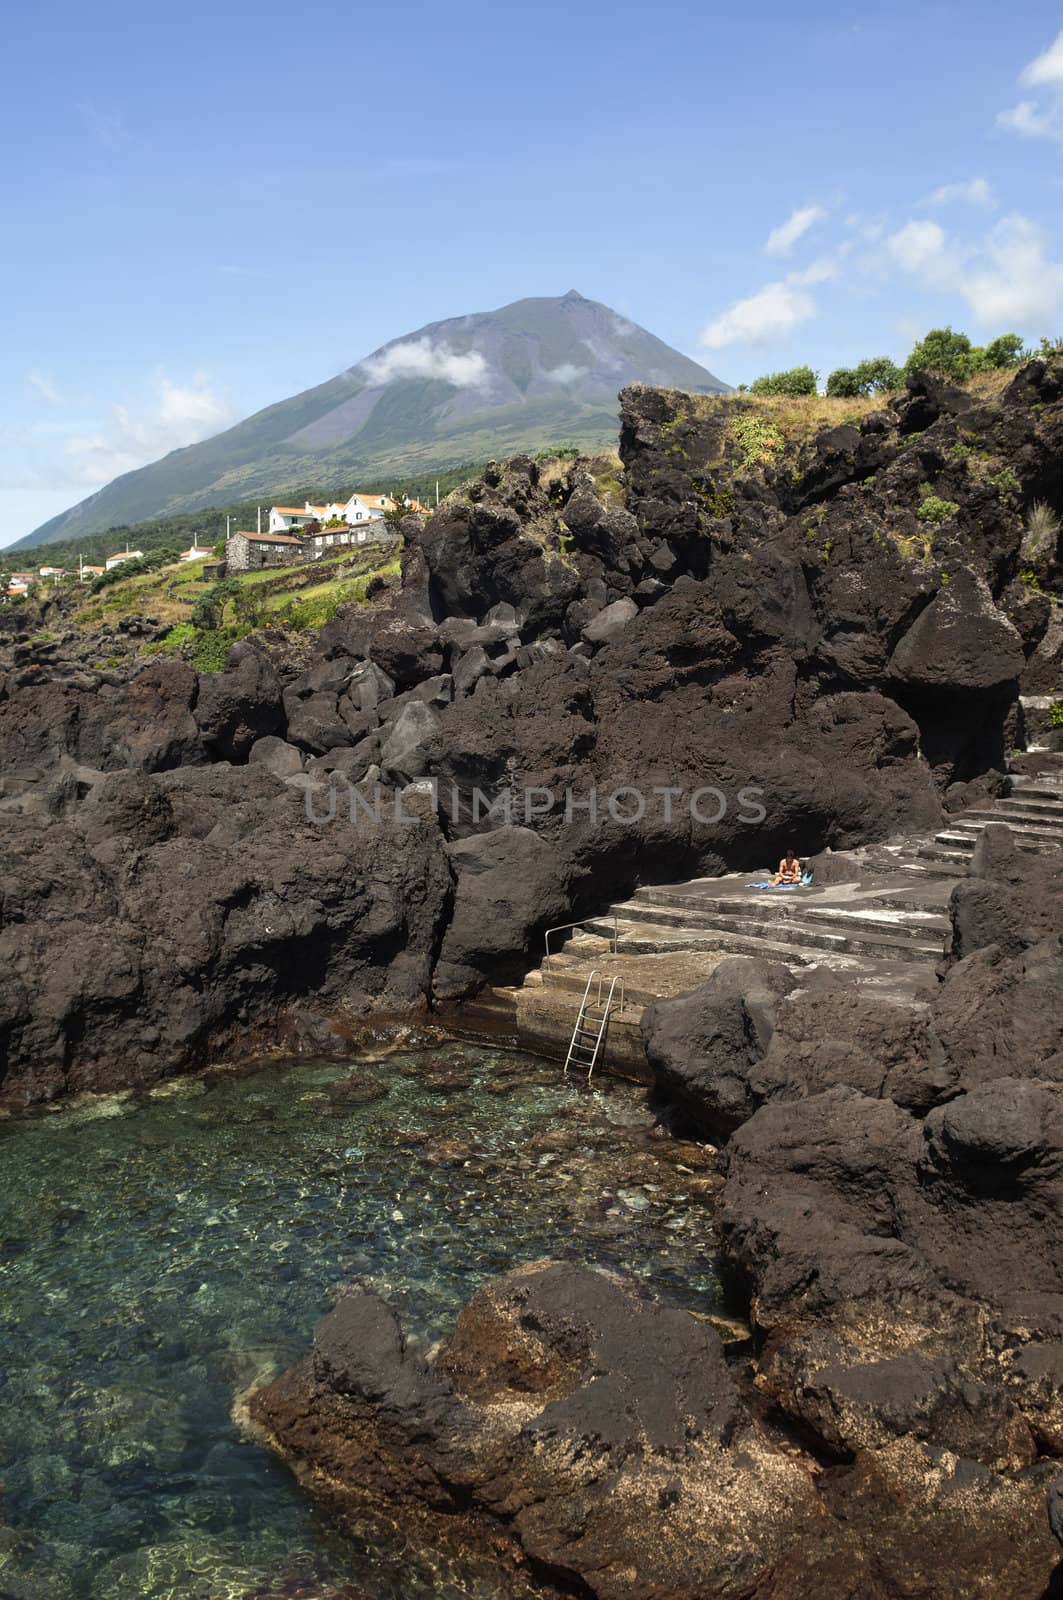 Natural swimming pool in Pico island, Azores